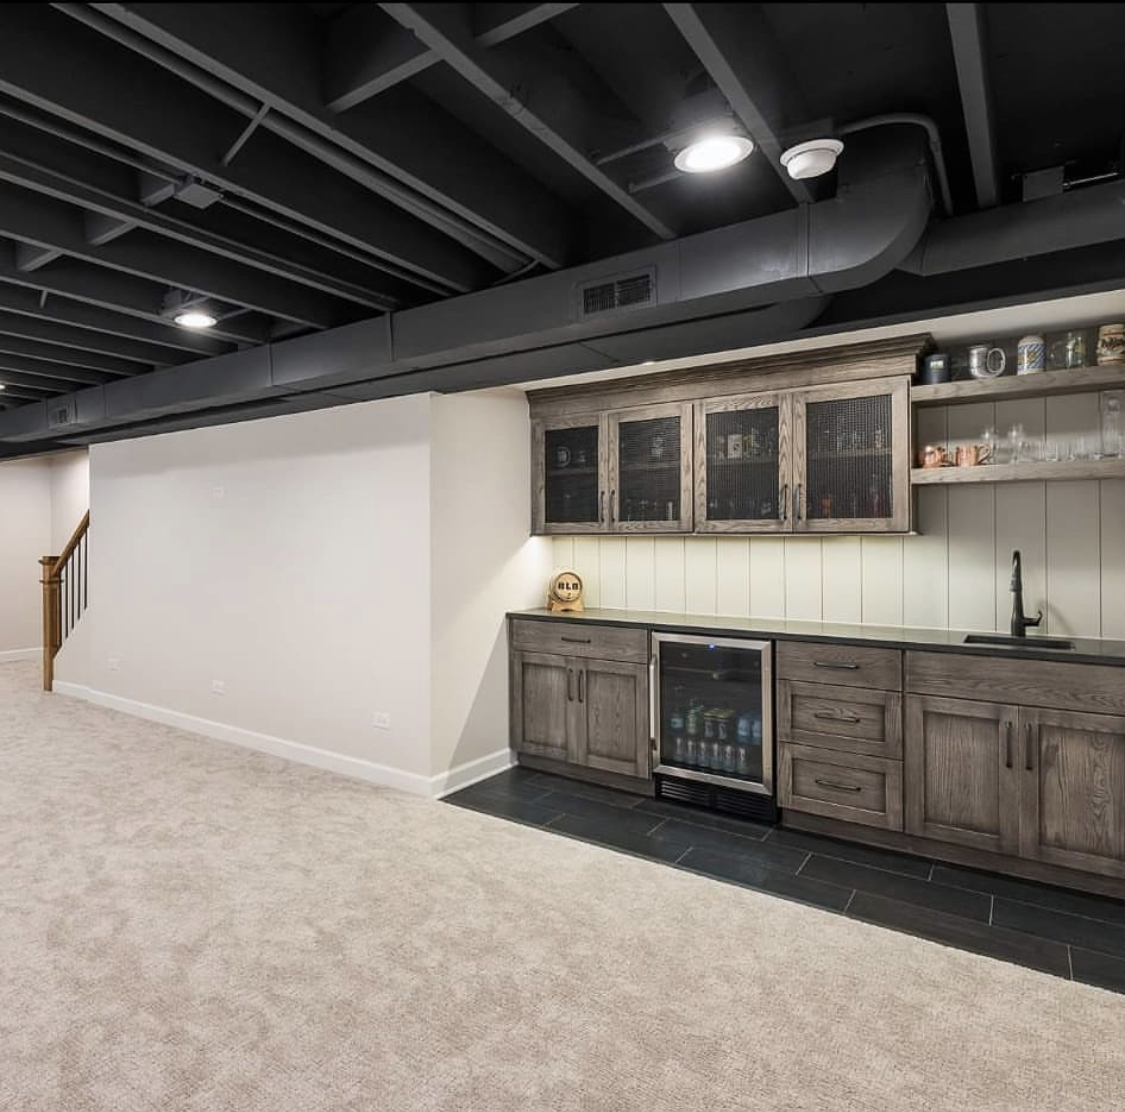 Basement Ceiling Ideas for your Michigan Home